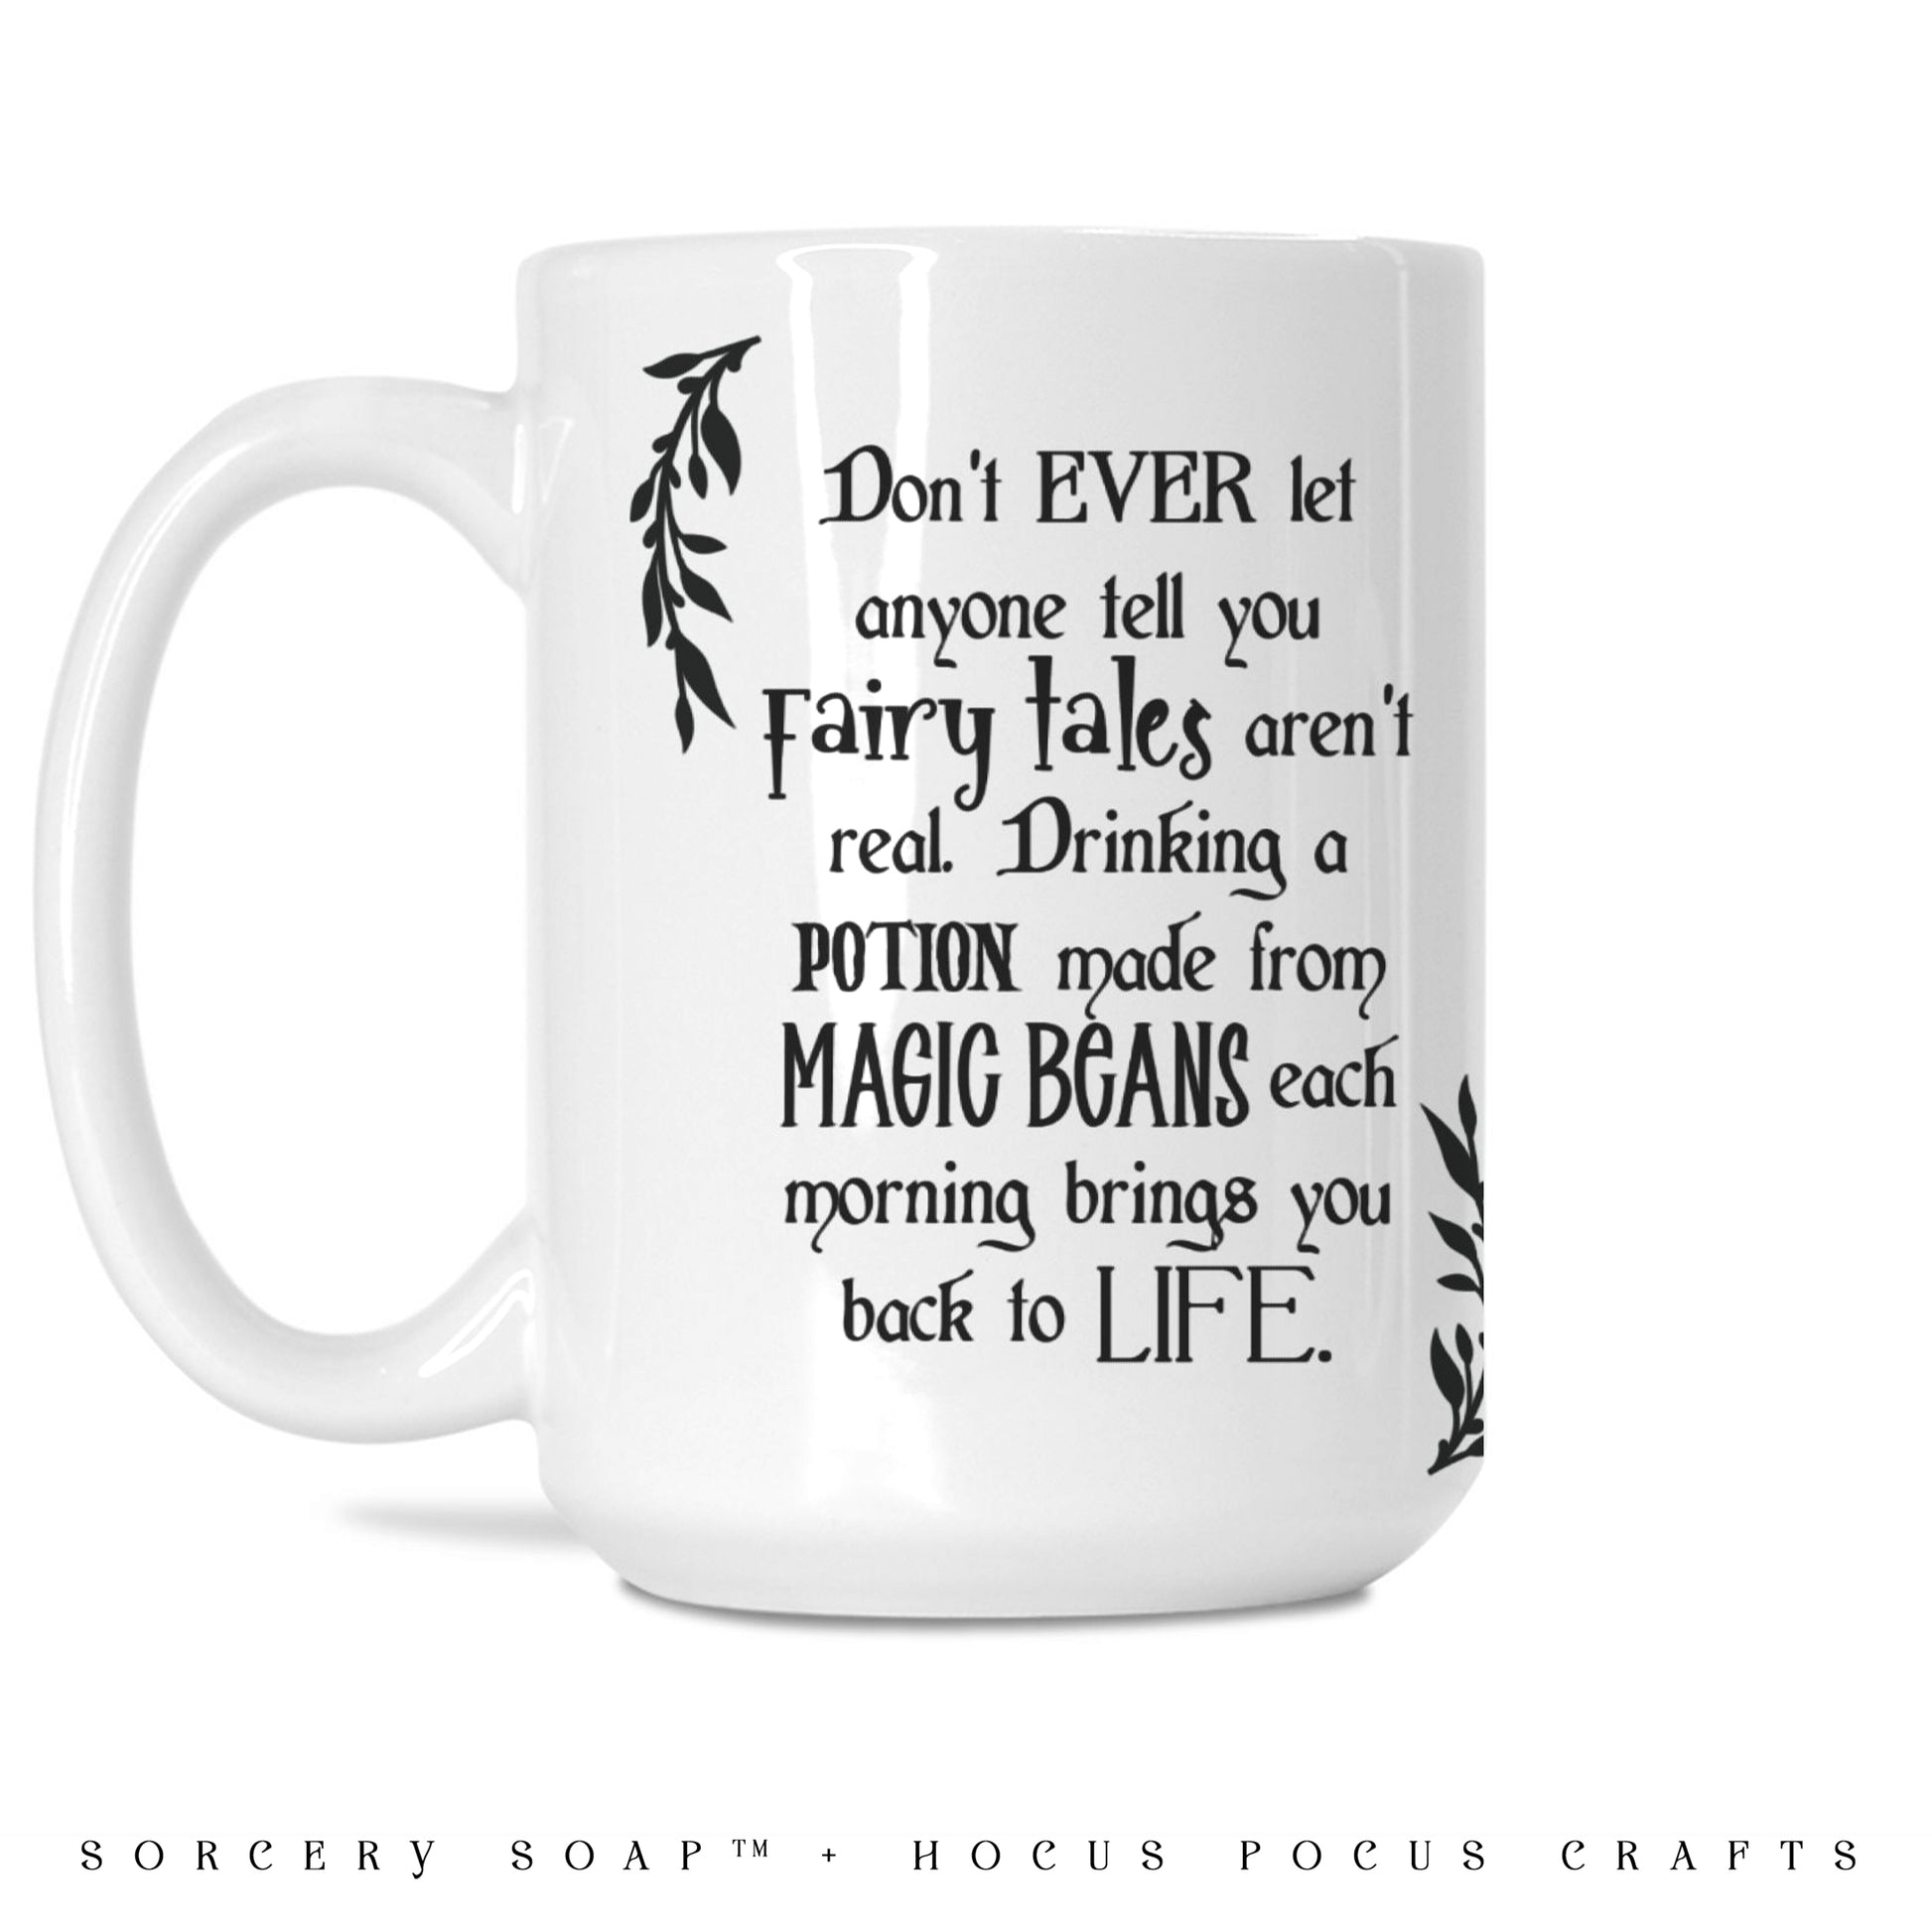 Witches Brew Coffee House Mug Deluxe 15 oz.